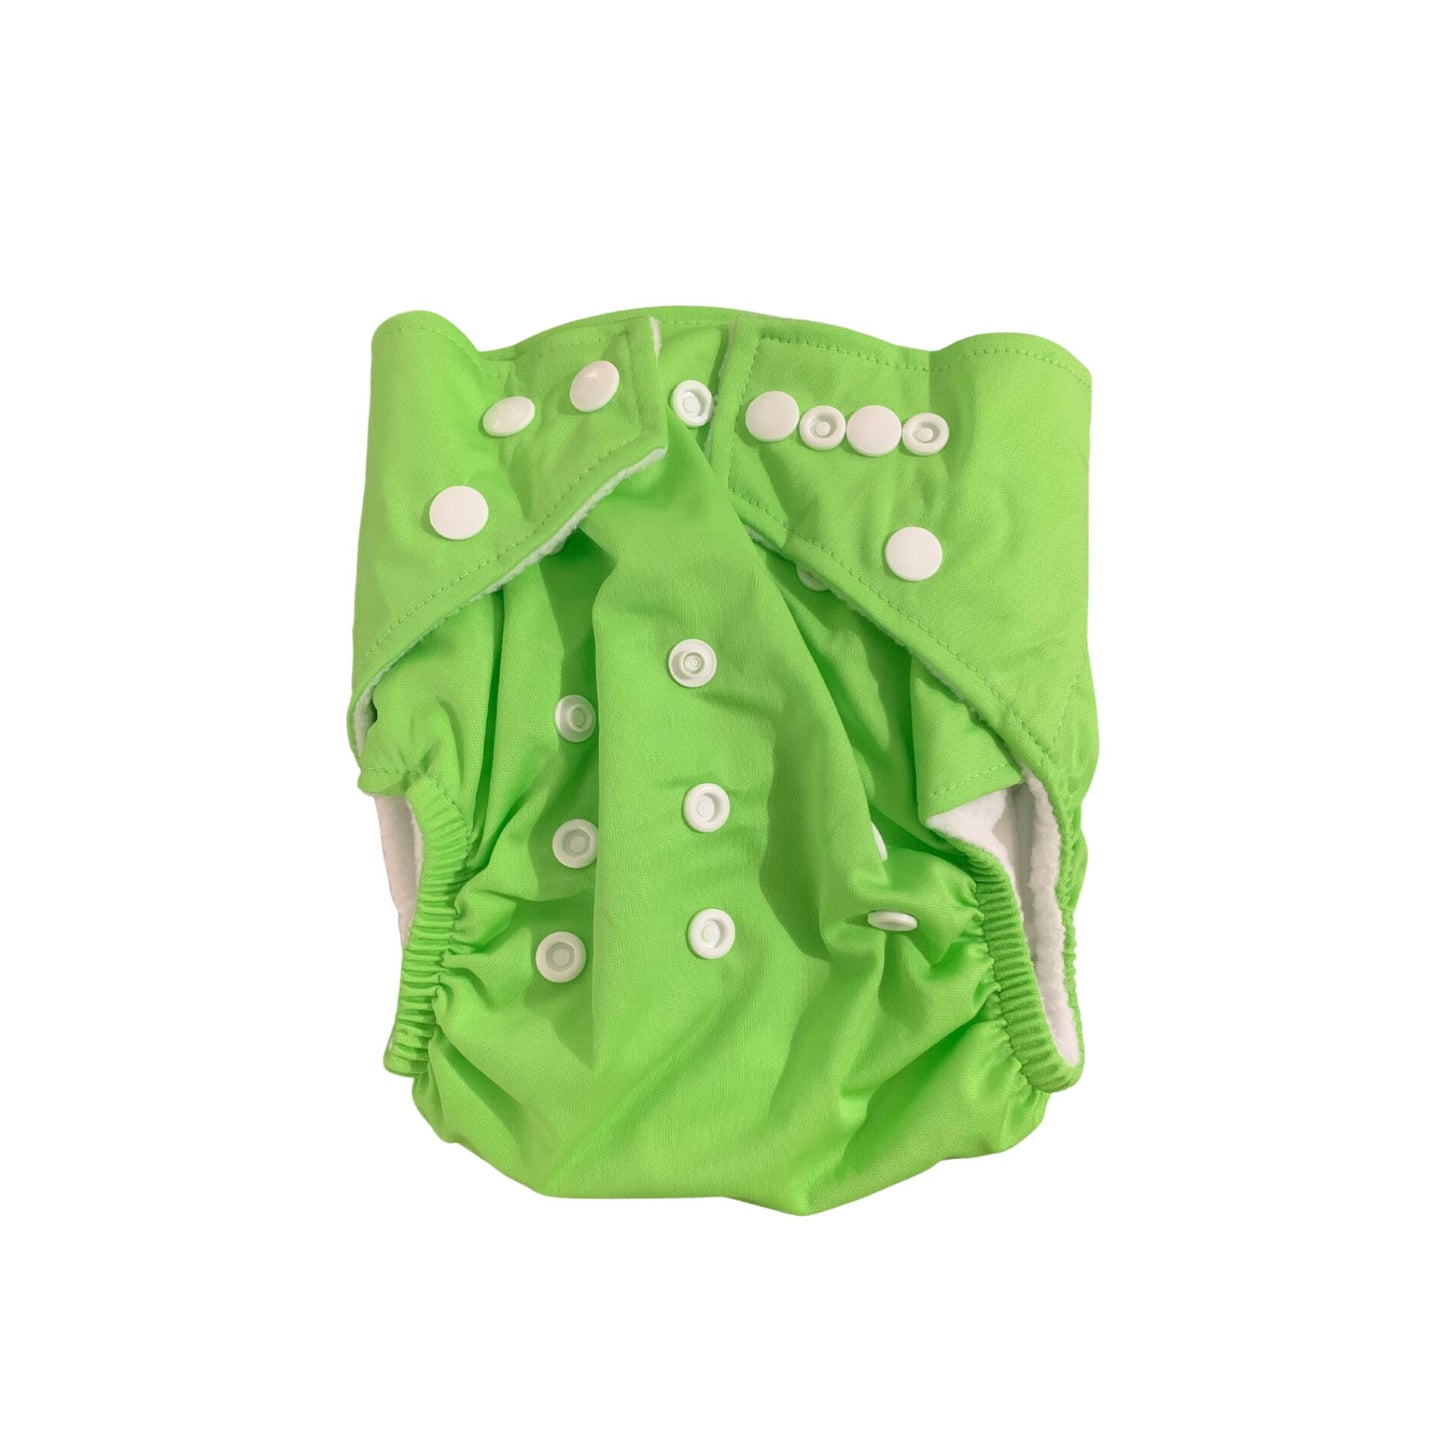 Next9 Cloth Diaper With Microfiber Insert Included